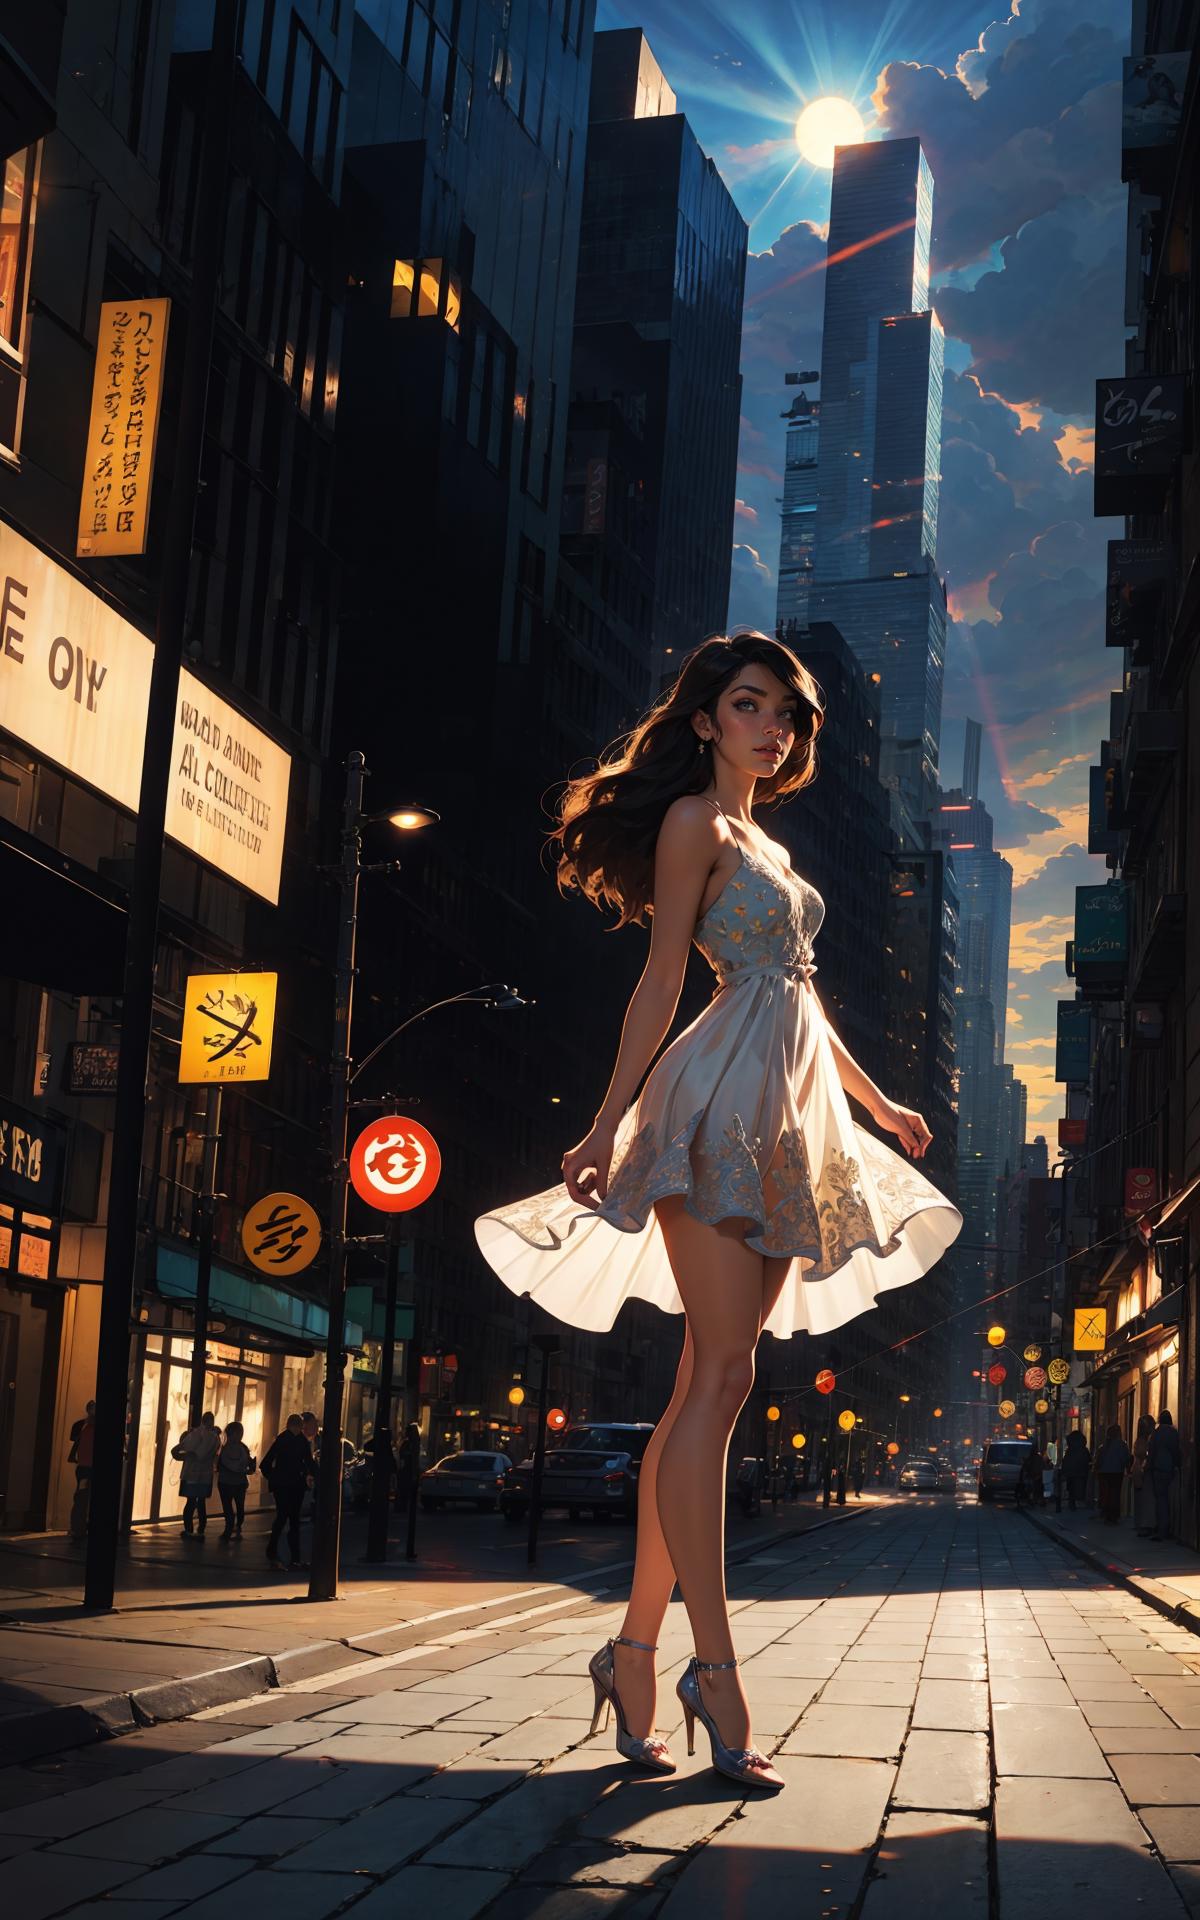 A woman in a white dress walking down a city street at night.